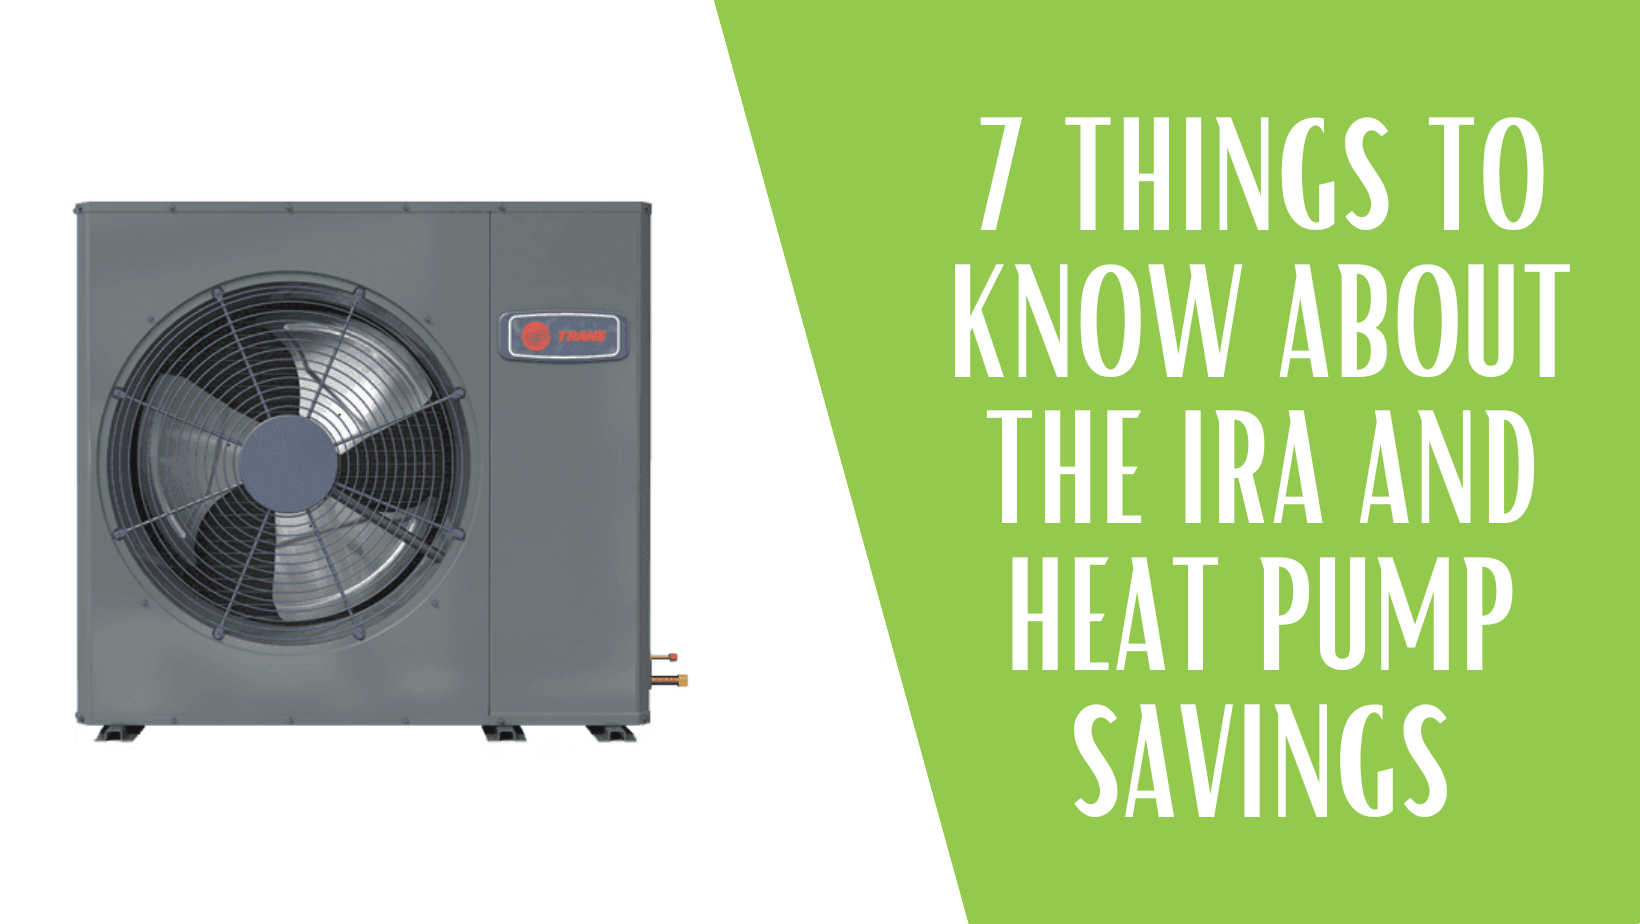 7 things to know about the IRA and heat pump savings